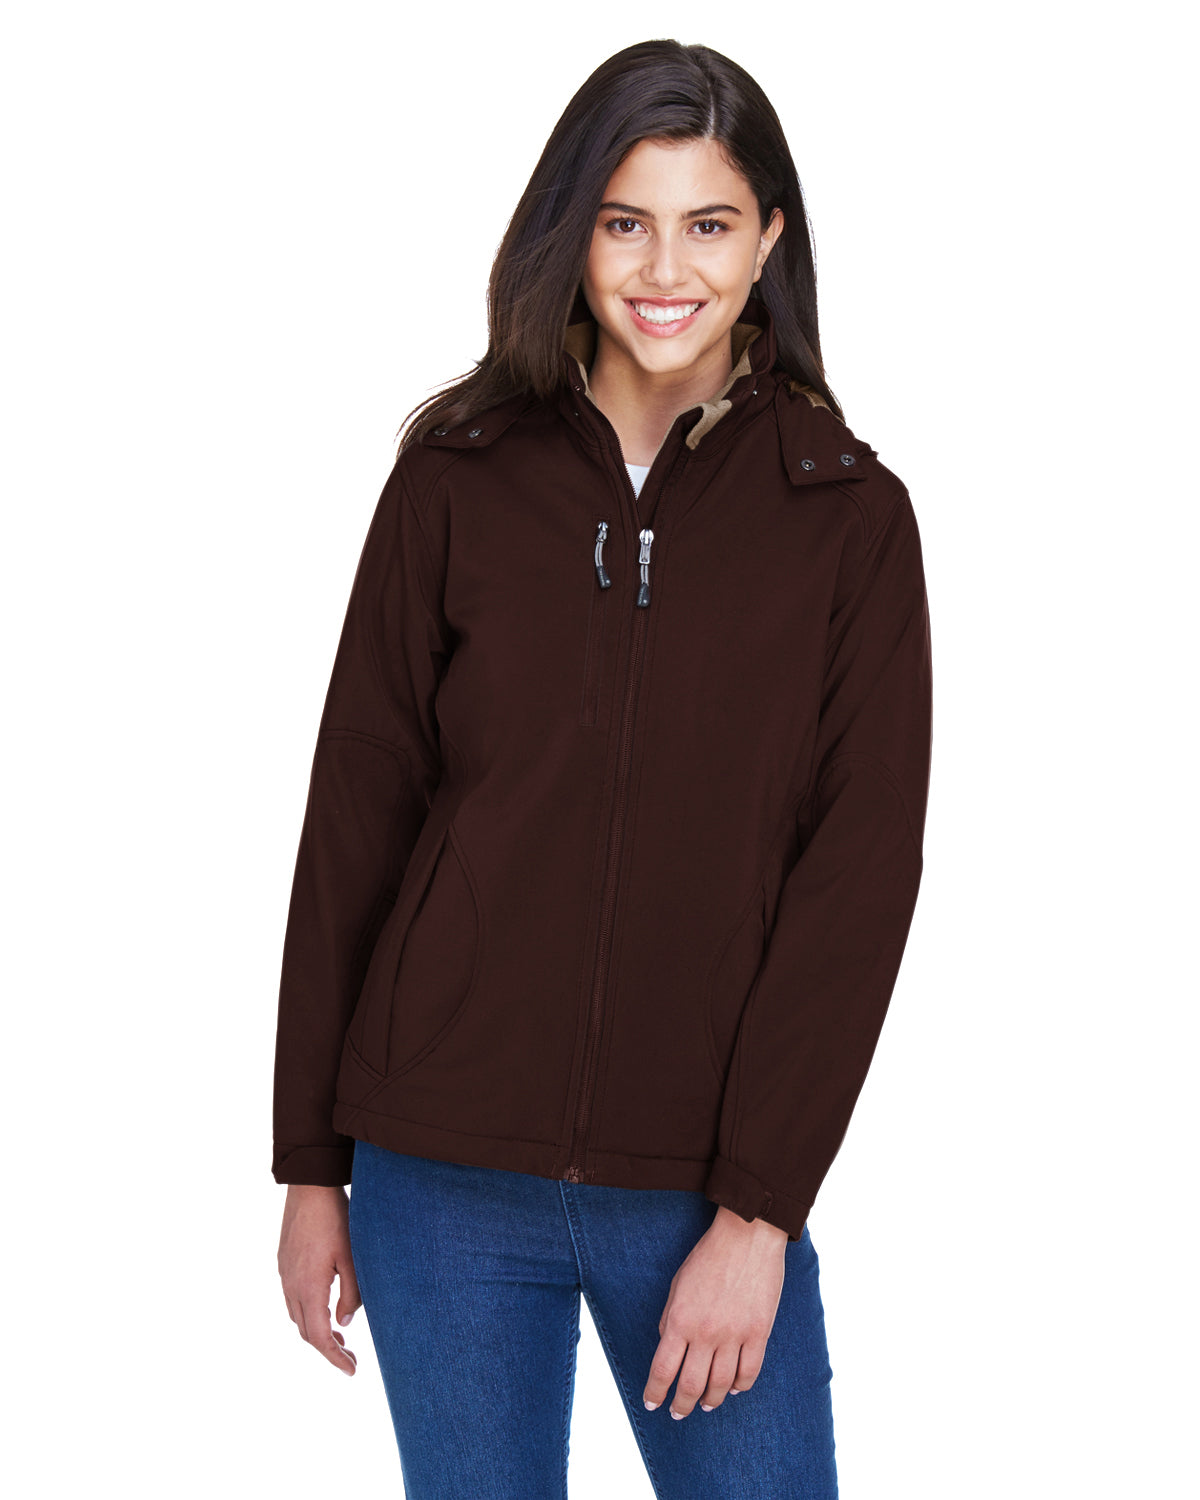 LADIES NORTH END GLACIER INSULATED 3 LAYER SOFT SHELL JACKET